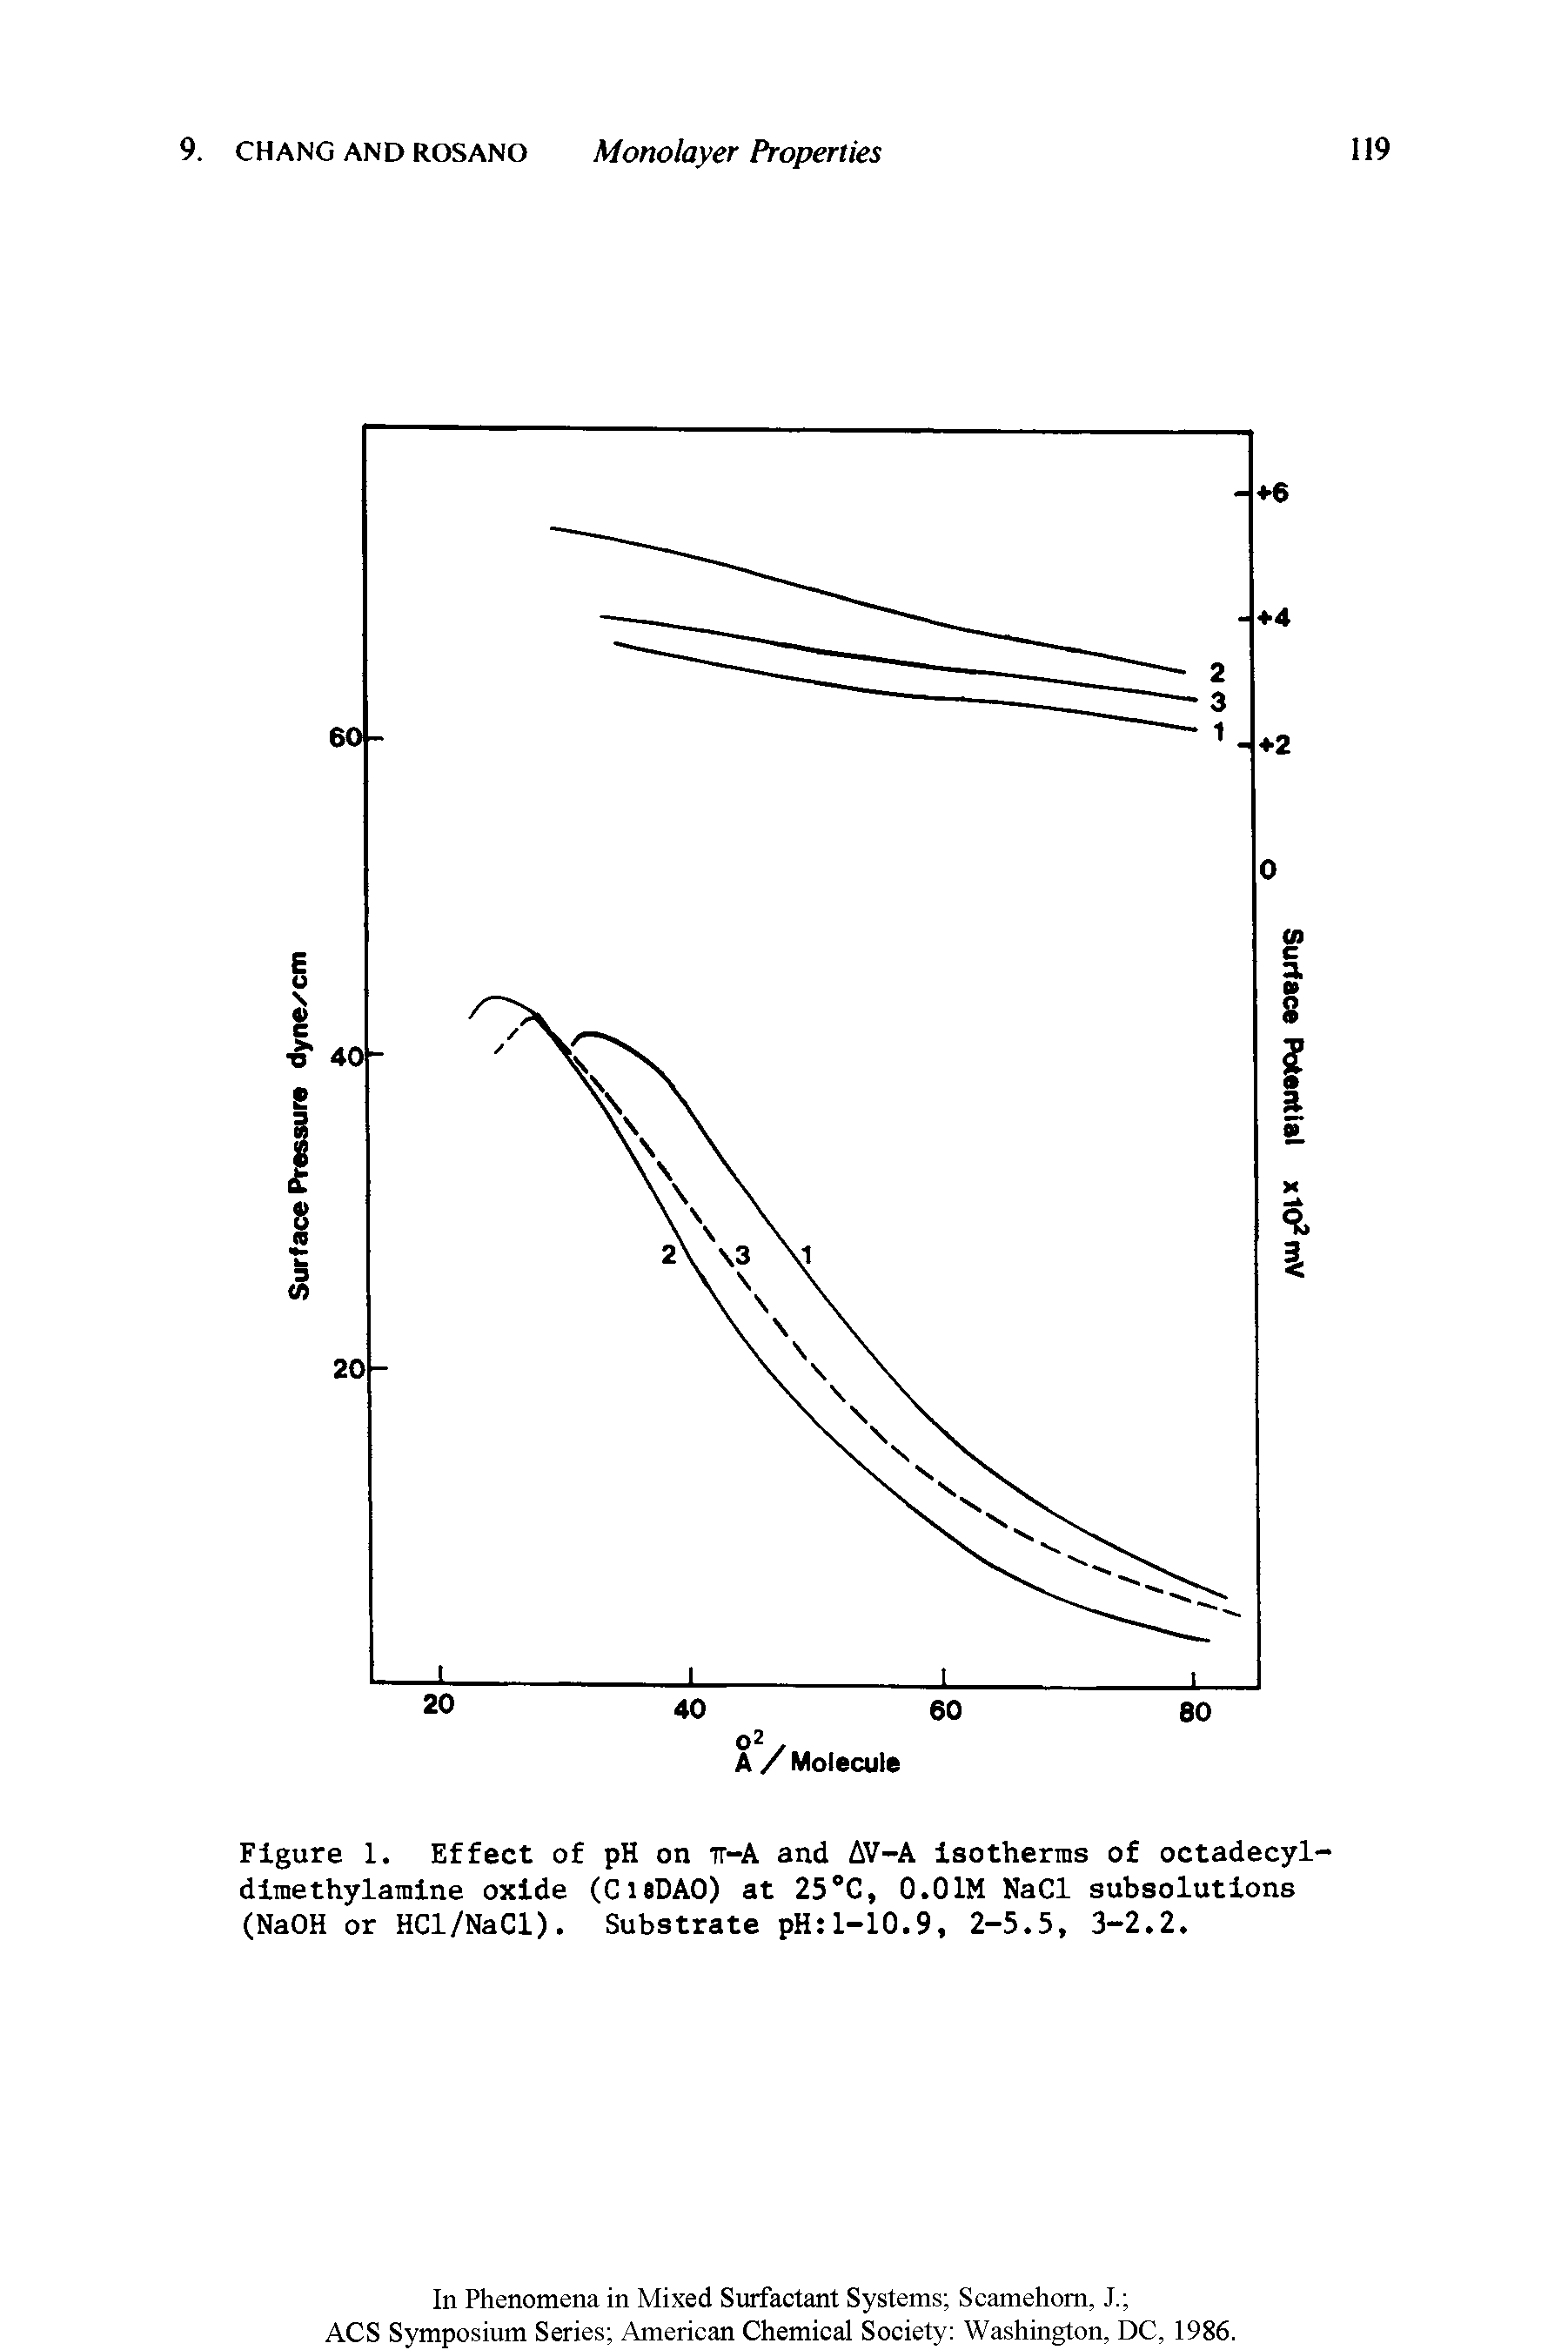 Figure 1. Effect of pH on ir-A and AV-A isotherms of octadecyl-dimethylamine oxide (ClsDAO) at 25 C, O.OIM NaCl subsolutions (NaOH or HCl/NaCl). Substrate pH 1-10.9, 2-5.5, 3-2.2.